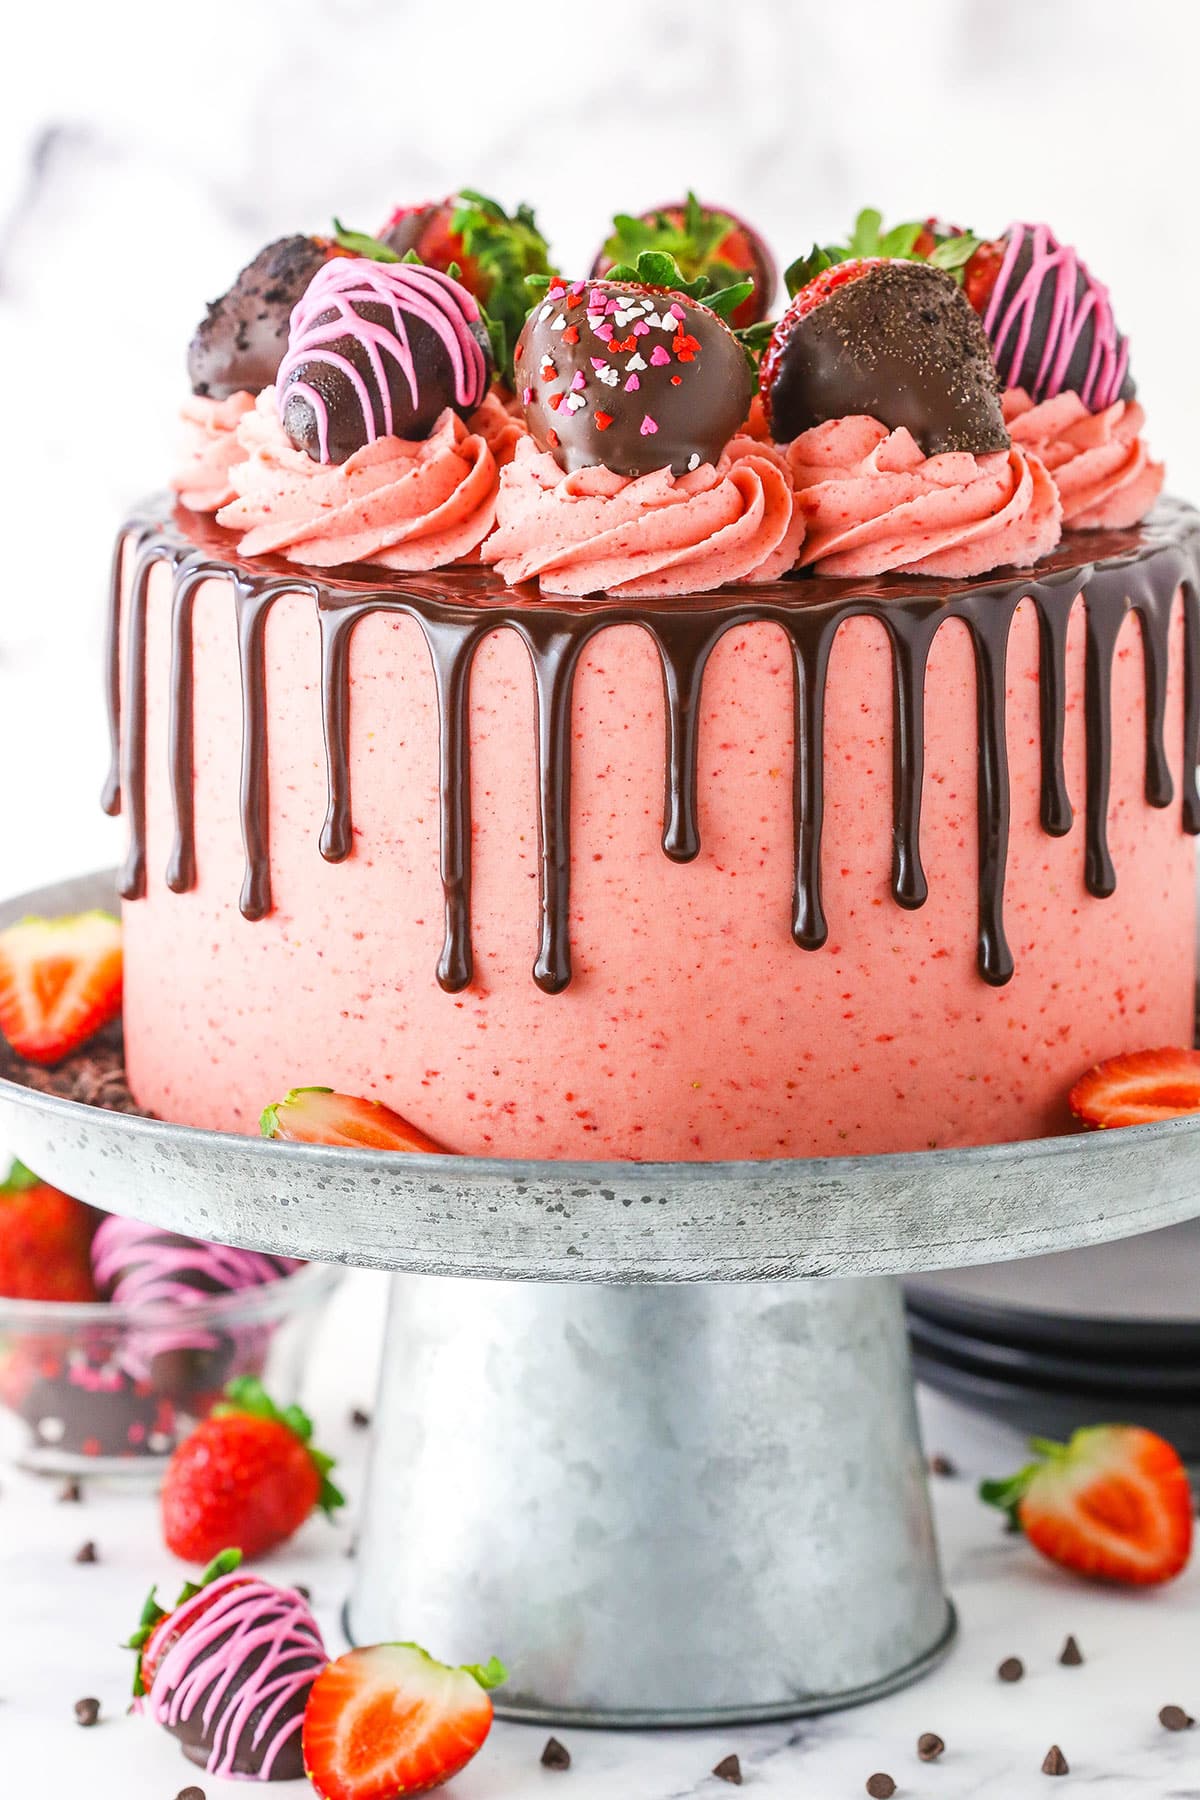 Side view of a full Chocolate Covered Strawberry Layer Cake topped with chocolate drip, pink swirls and chocolate covered strawberries on a metal cake stand